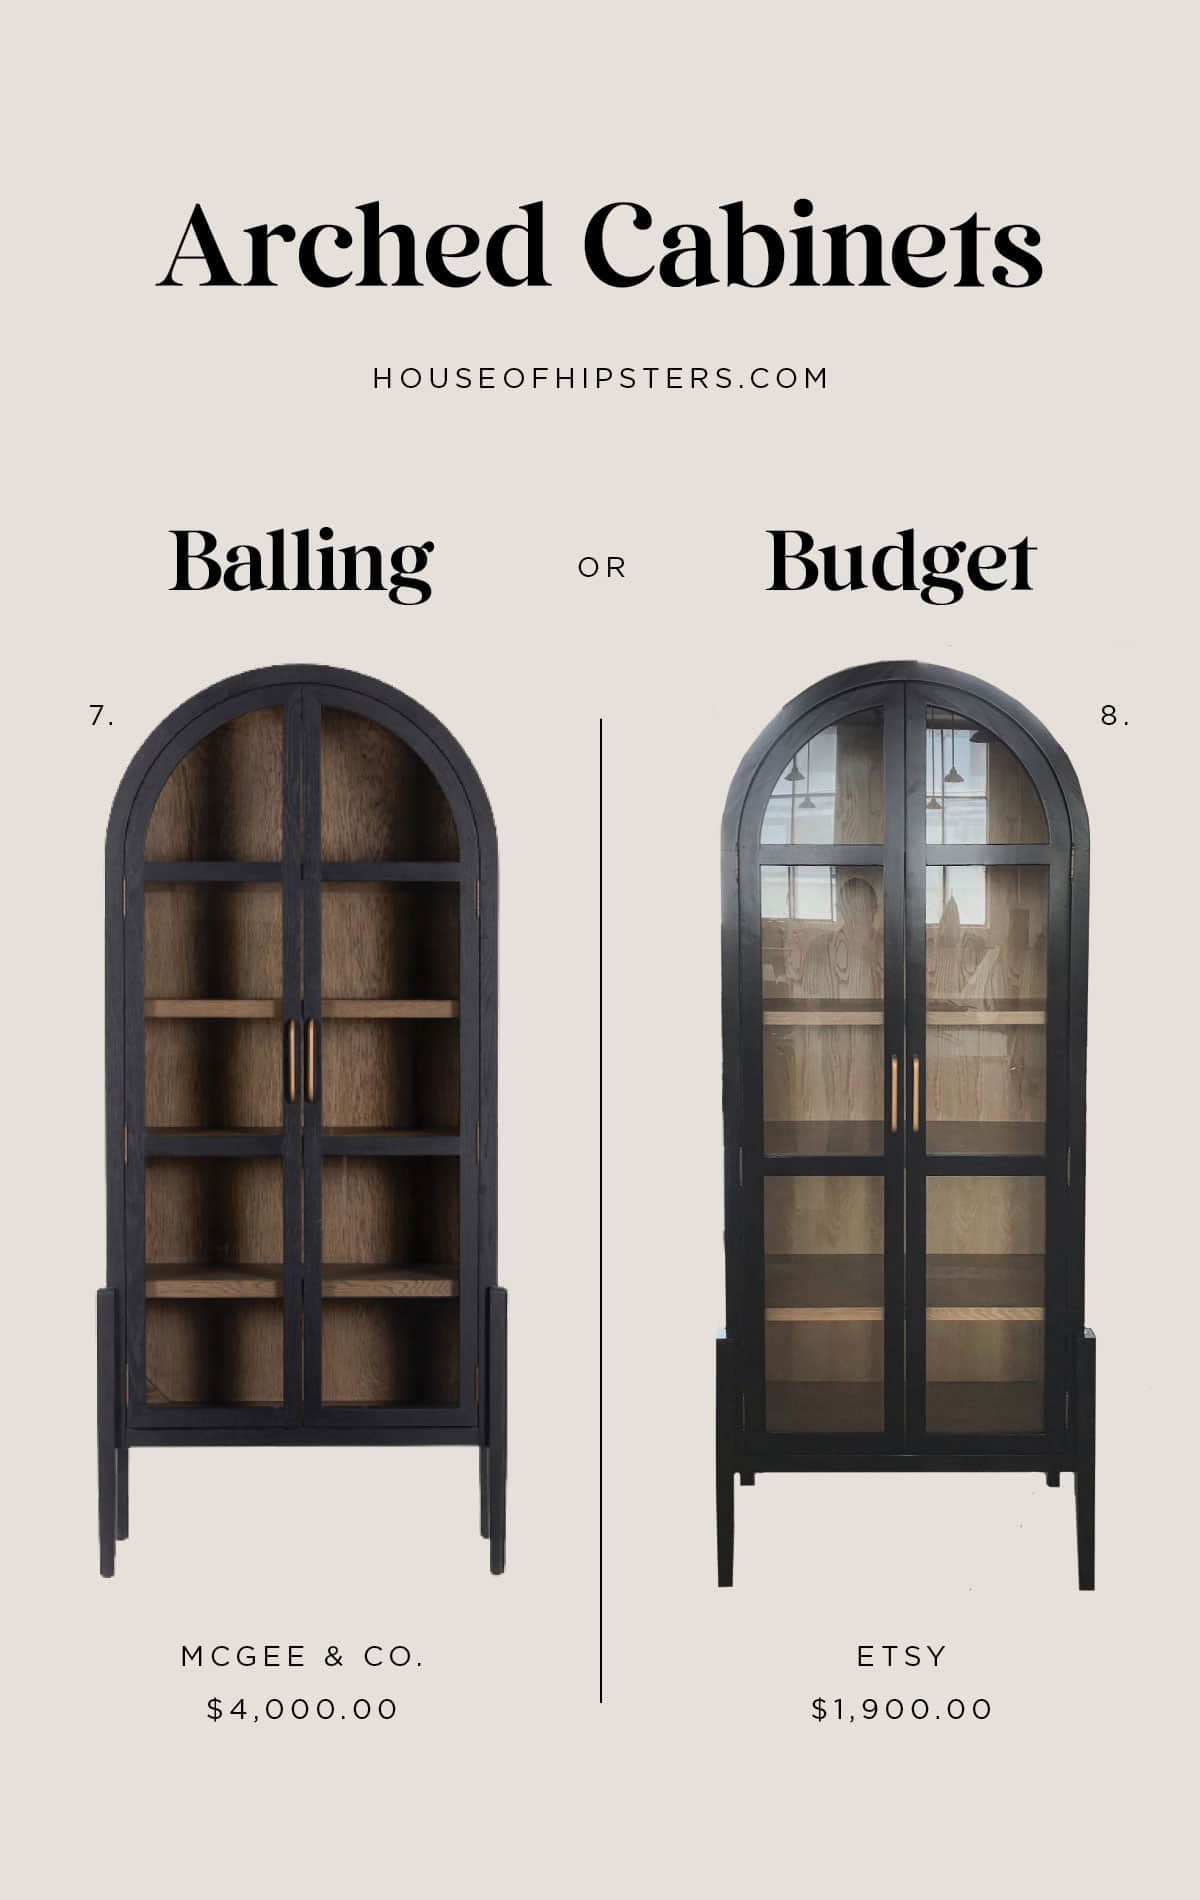 22 Stunning Arched Cabinets 2023 - Splurge or save on these black arched cabinets, you decide!